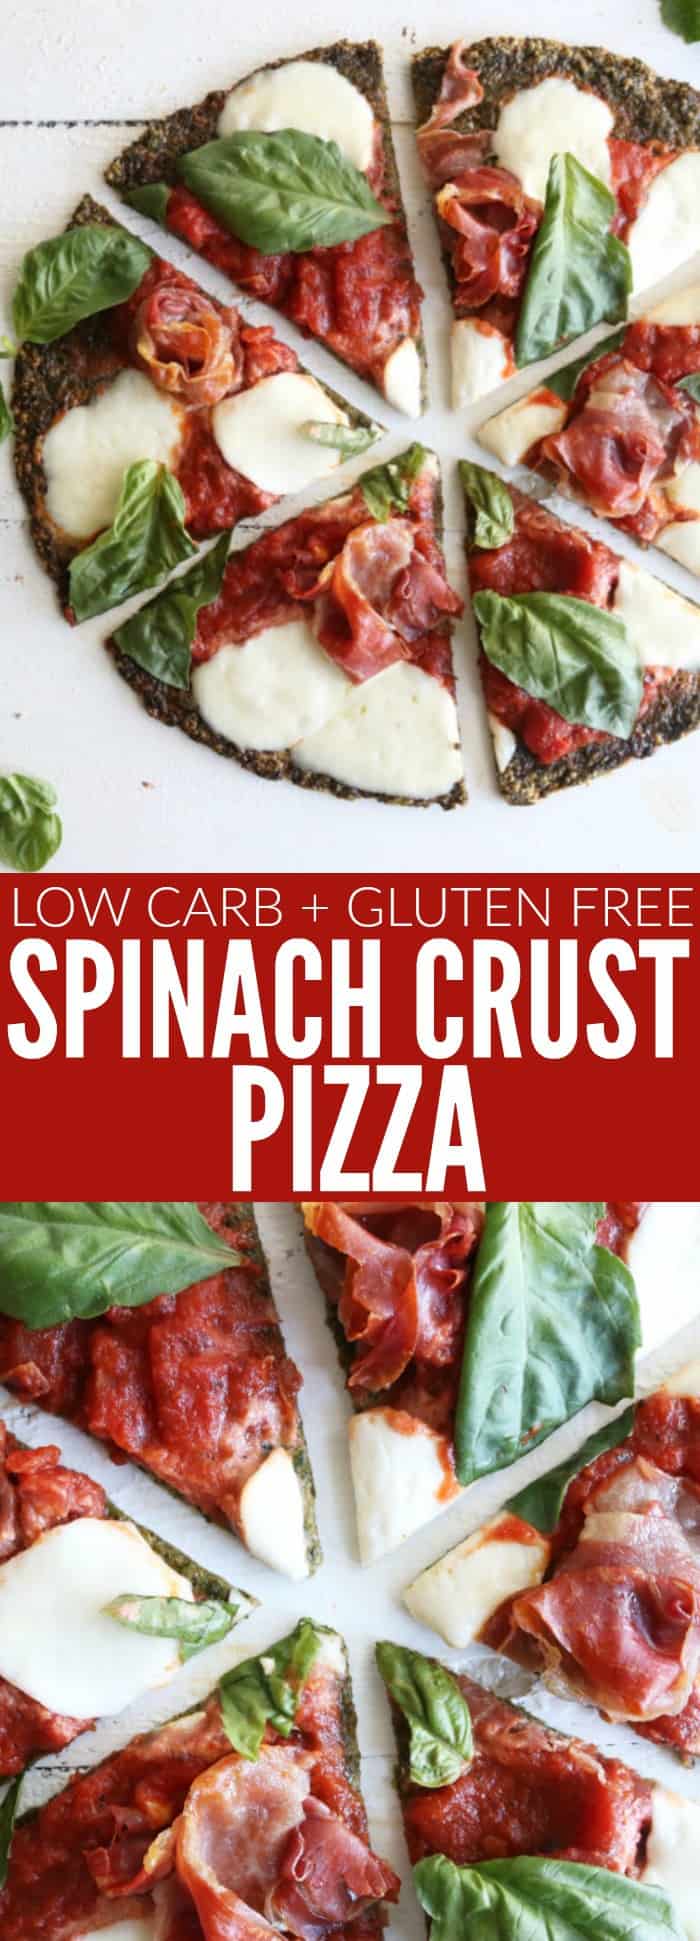 Obsessed with this Spinach + Kale Crust Pizza recipe! Get your extra serving of greens and indulge in pizza night without the guilt! thetoastedpinenut.com #lowcarb #glutenfree #spinach #kale #pizza